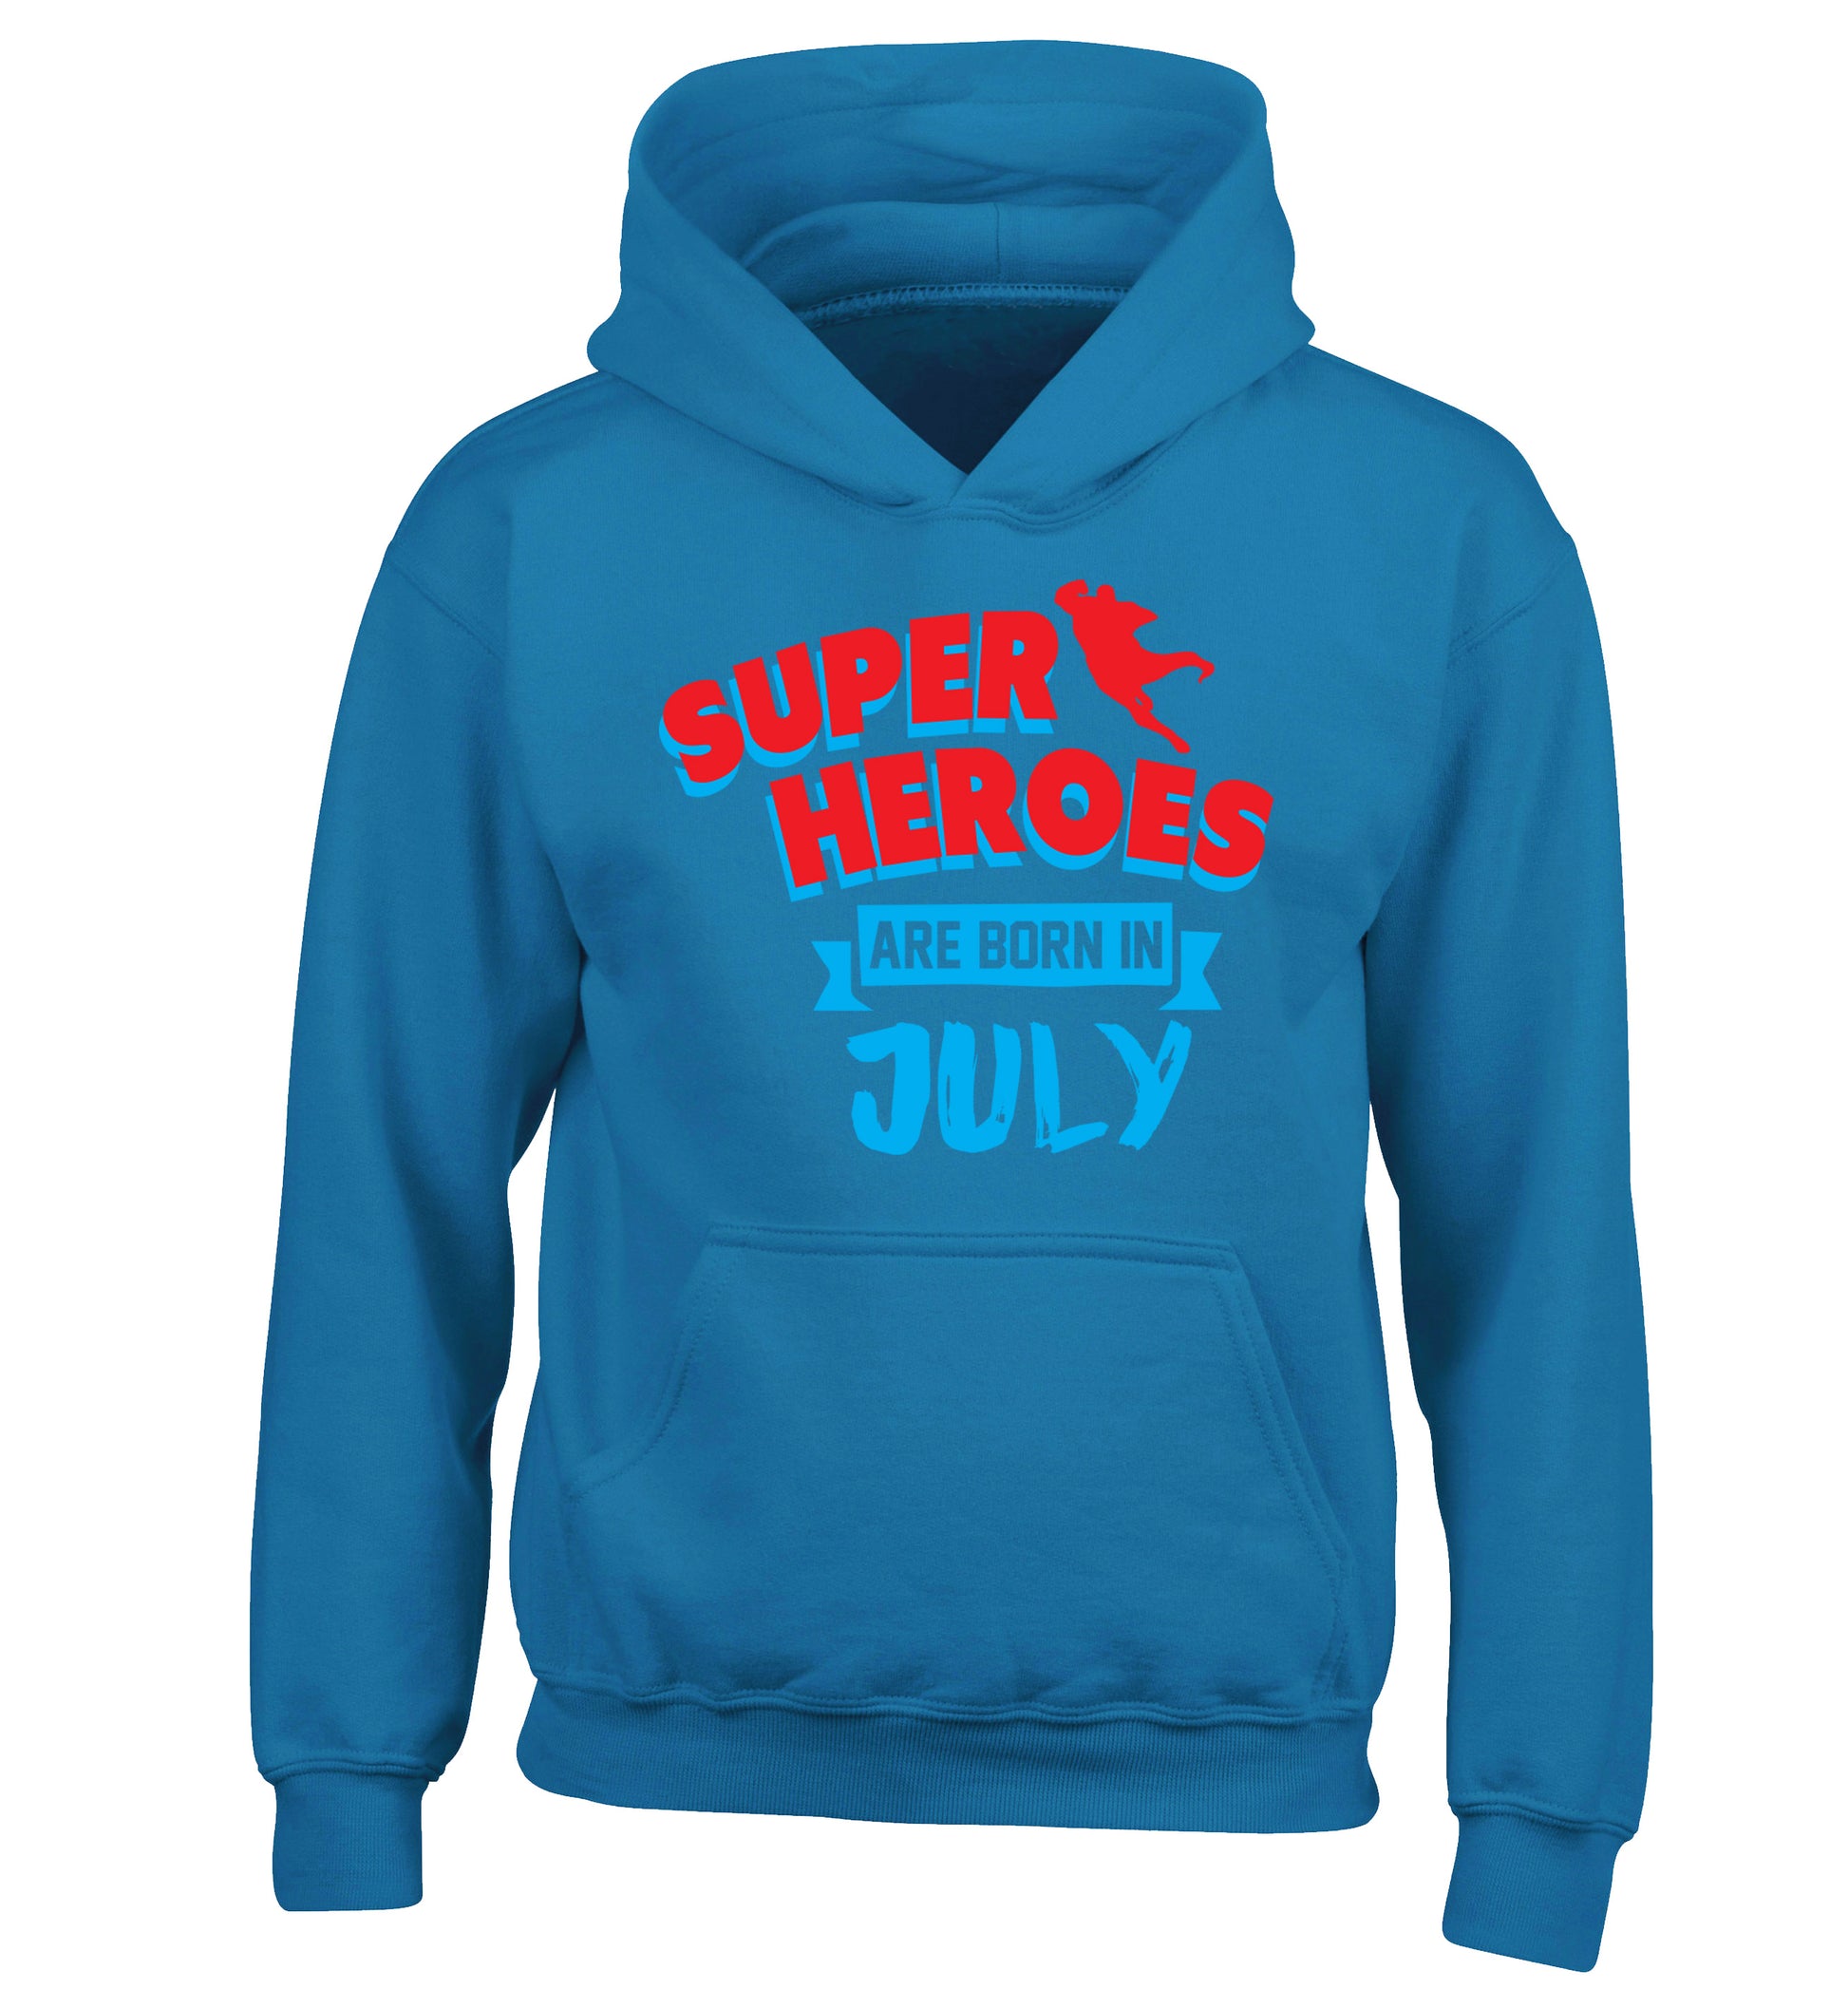 Superheroes are born in July children's blue hoodie 12-13 Years